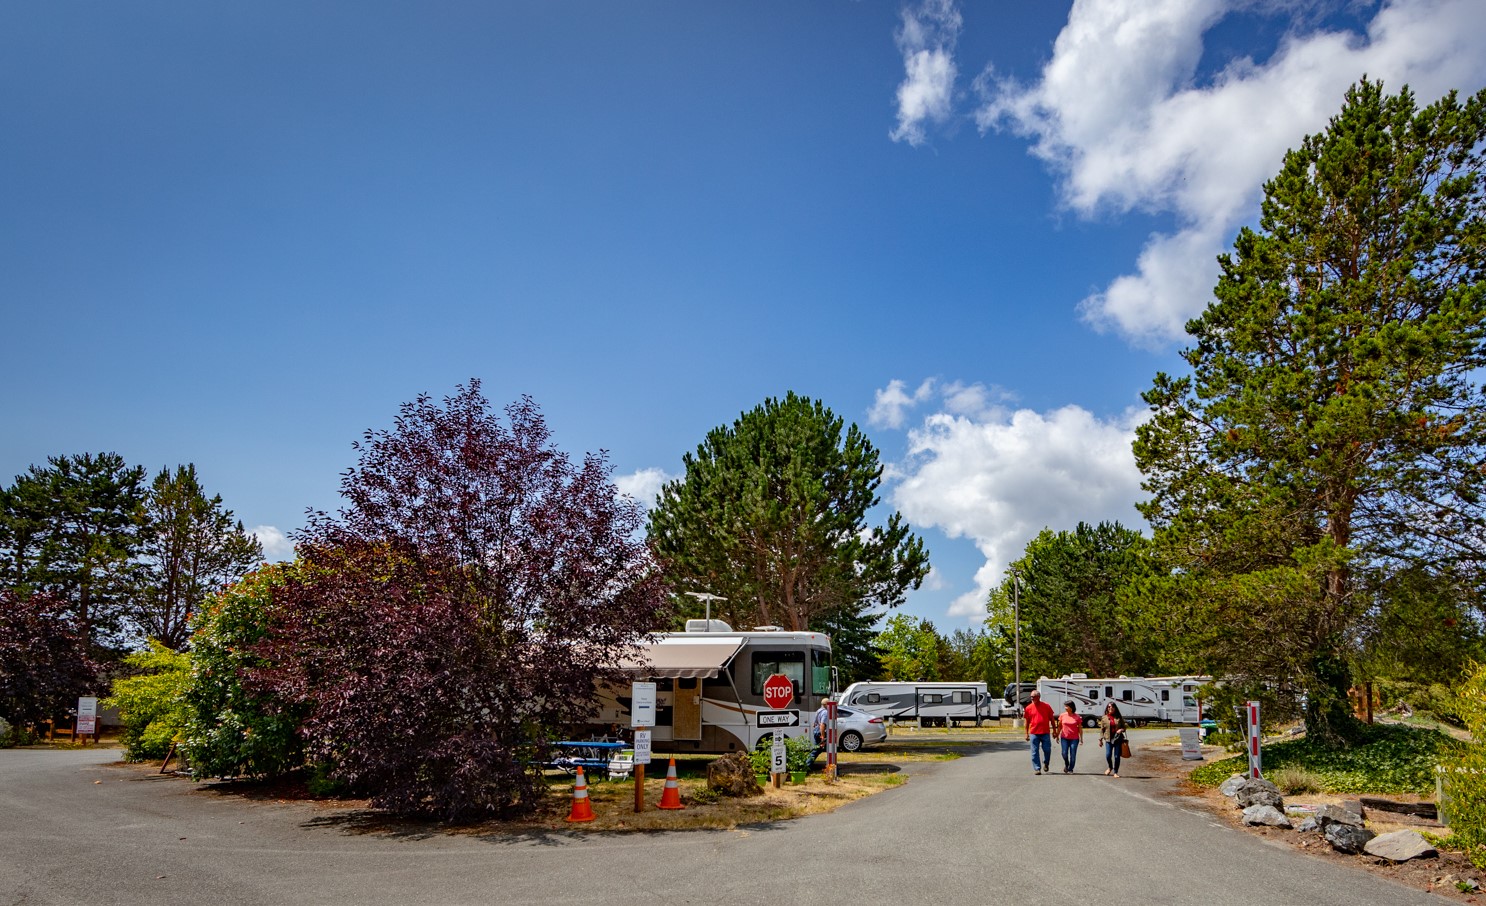 beautiful Skagit Valley — campers stroll through a tree-lined RV park